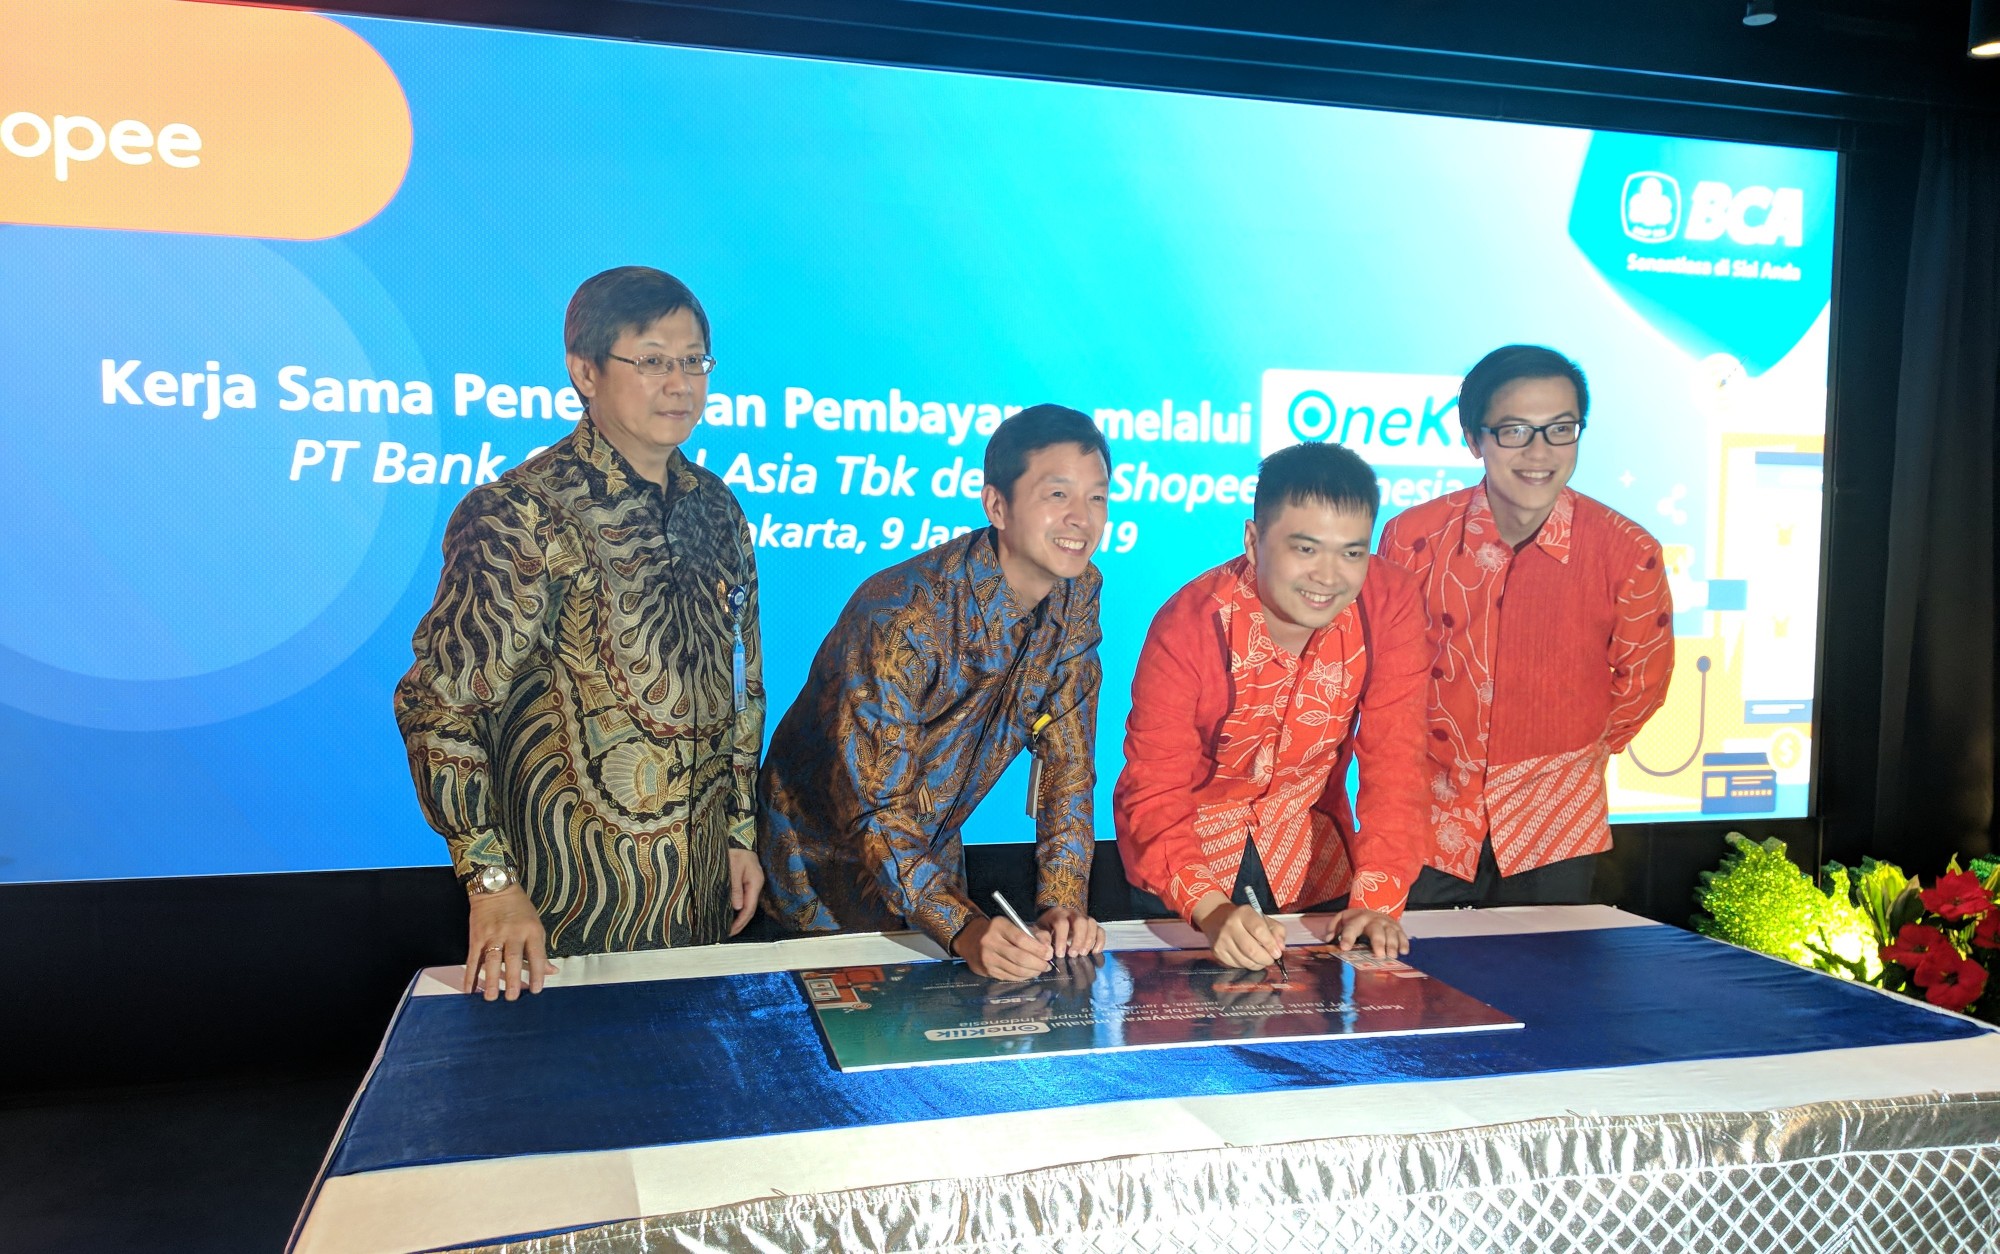 MoU signing between BCA and Shopee for OneKlik